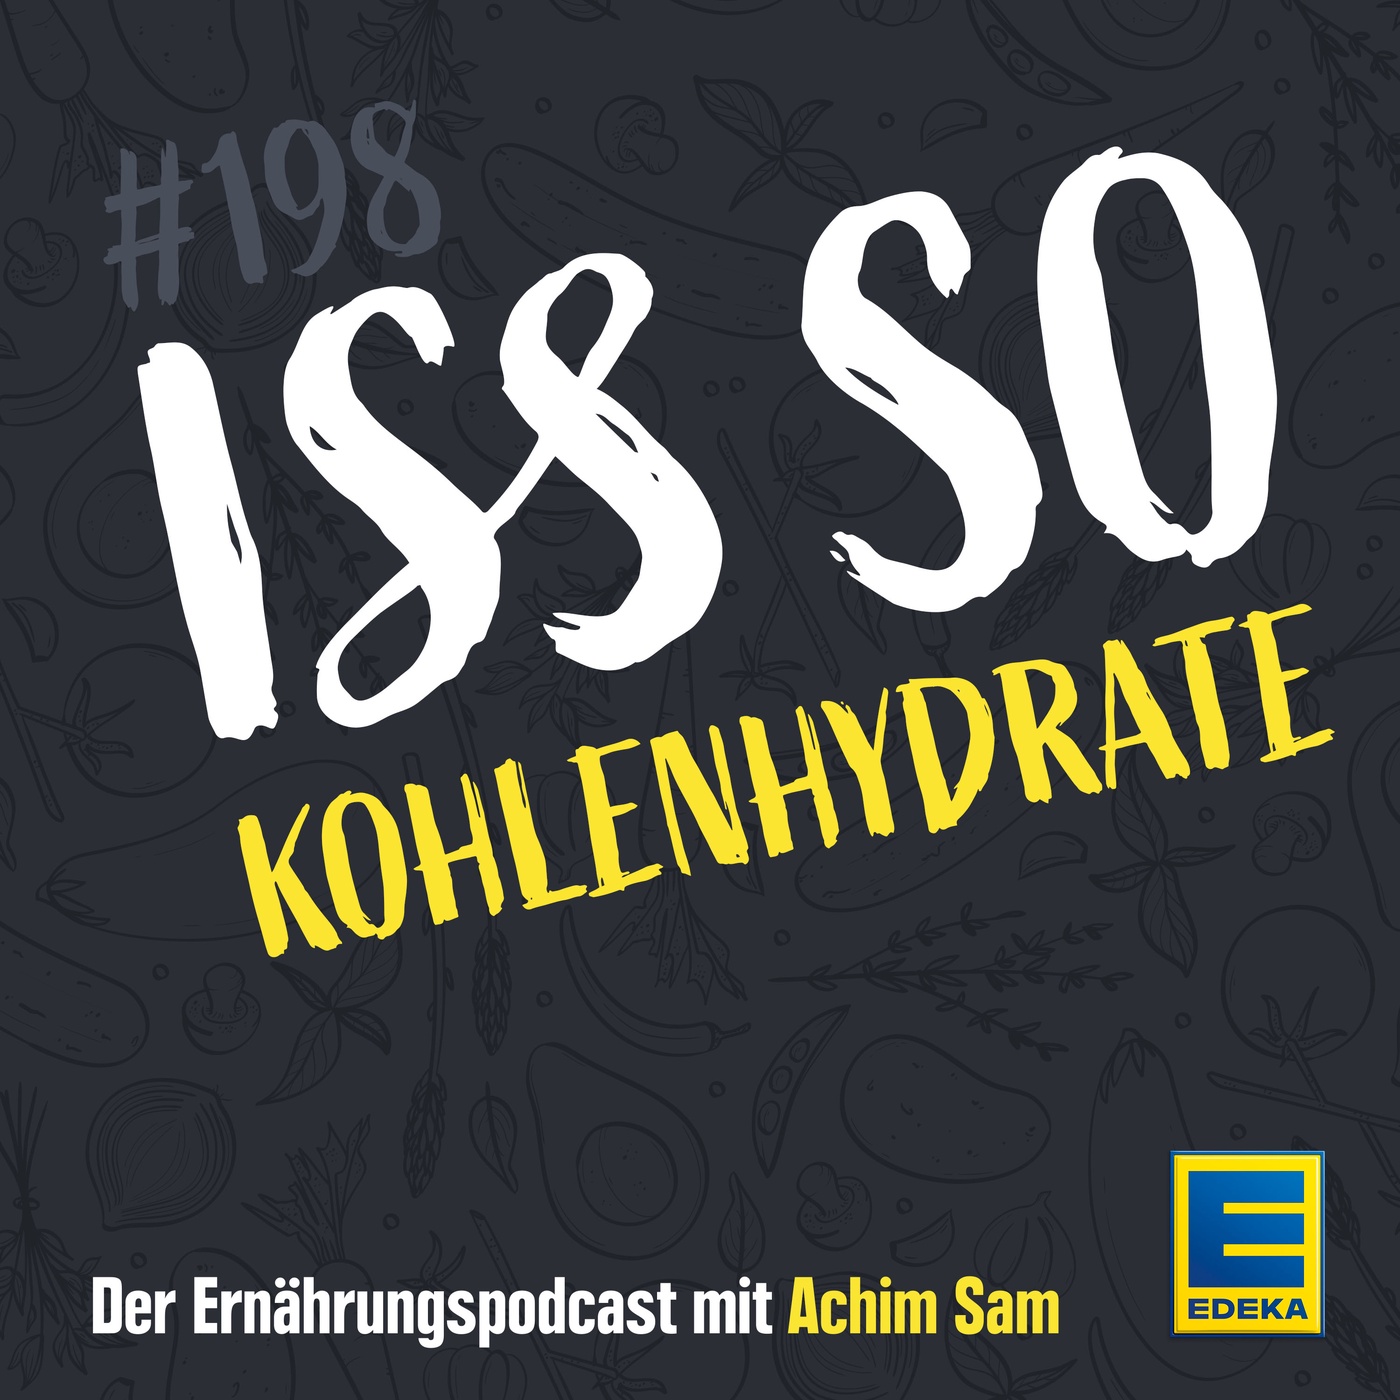 EP 198: Kohlenhydrate – Von Low- bis High-Carb